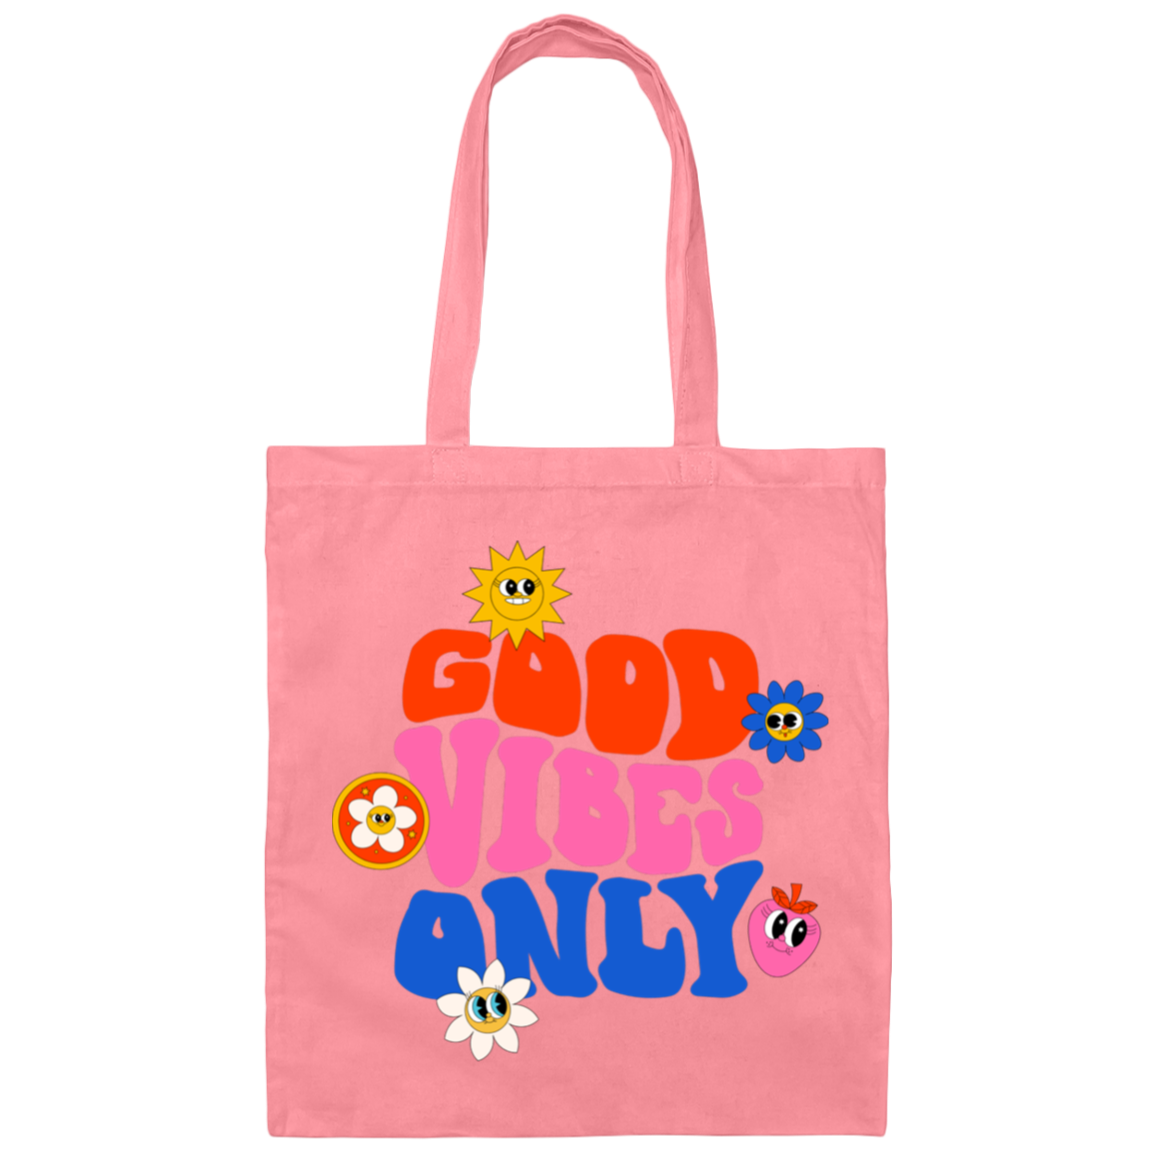 Good Vibes Only Canvas Tote Bag